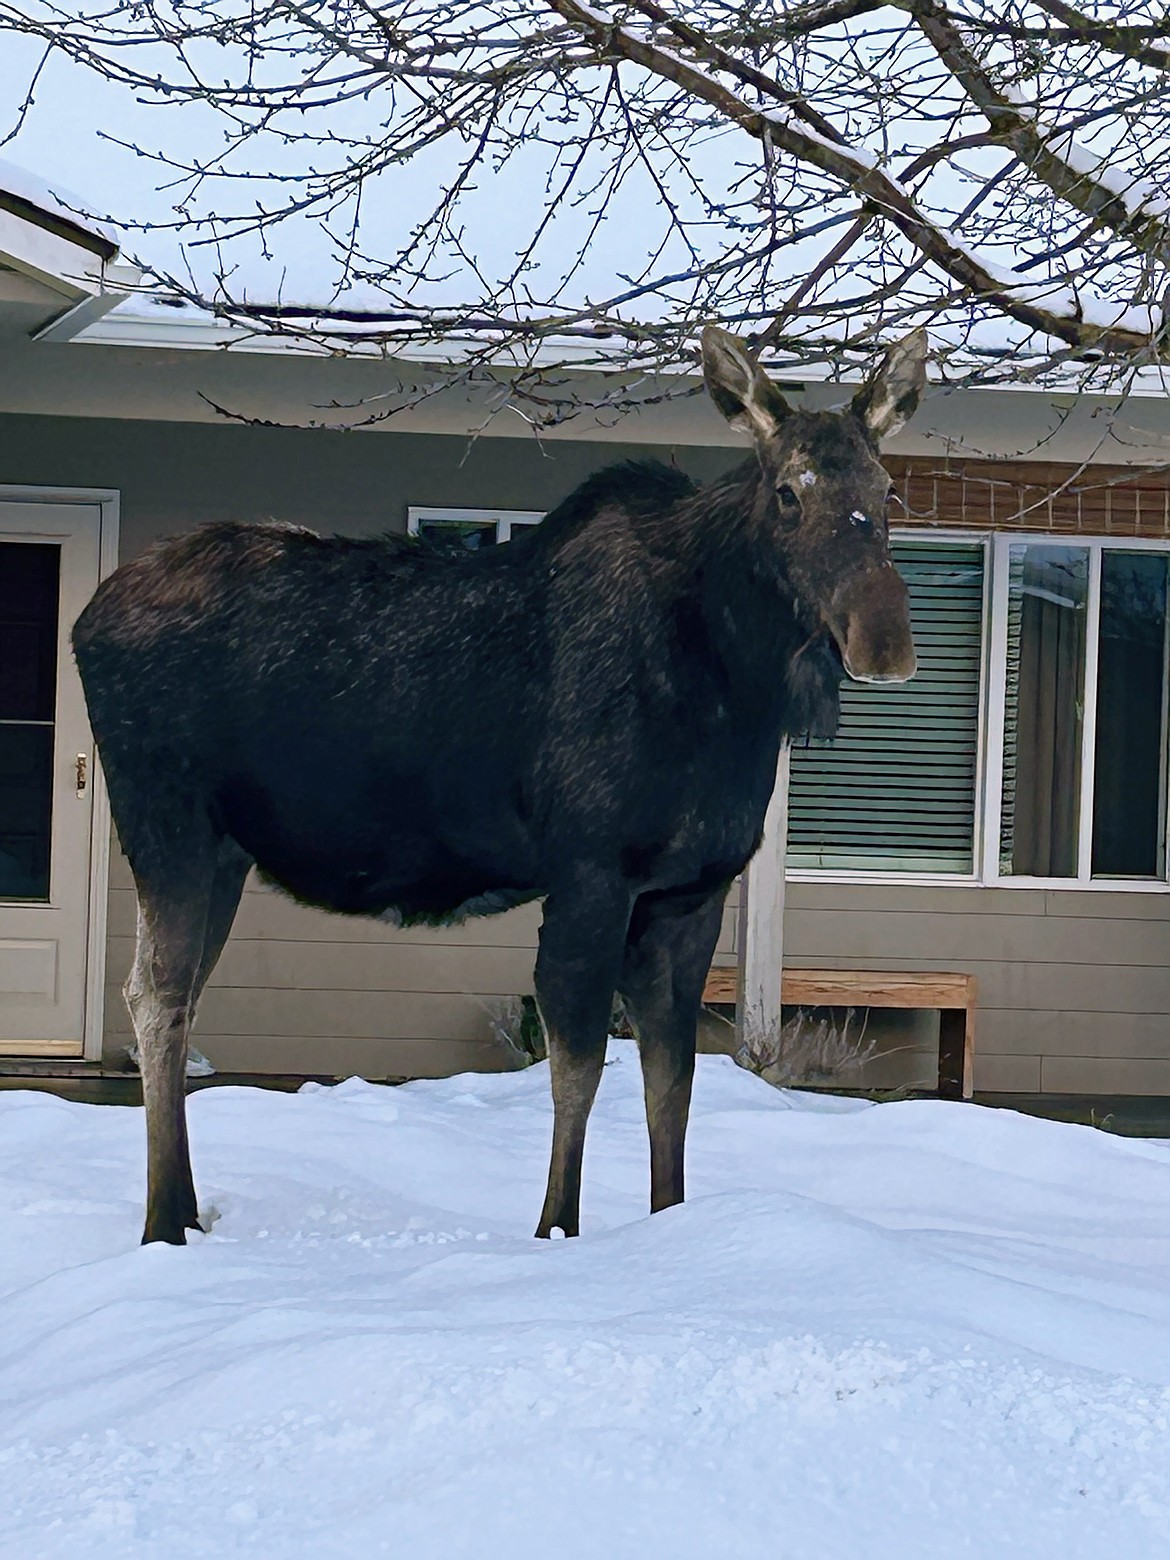 Donna Davis captured this Best Shot of a moose on the loose in the streets of downtown Sandpoint.